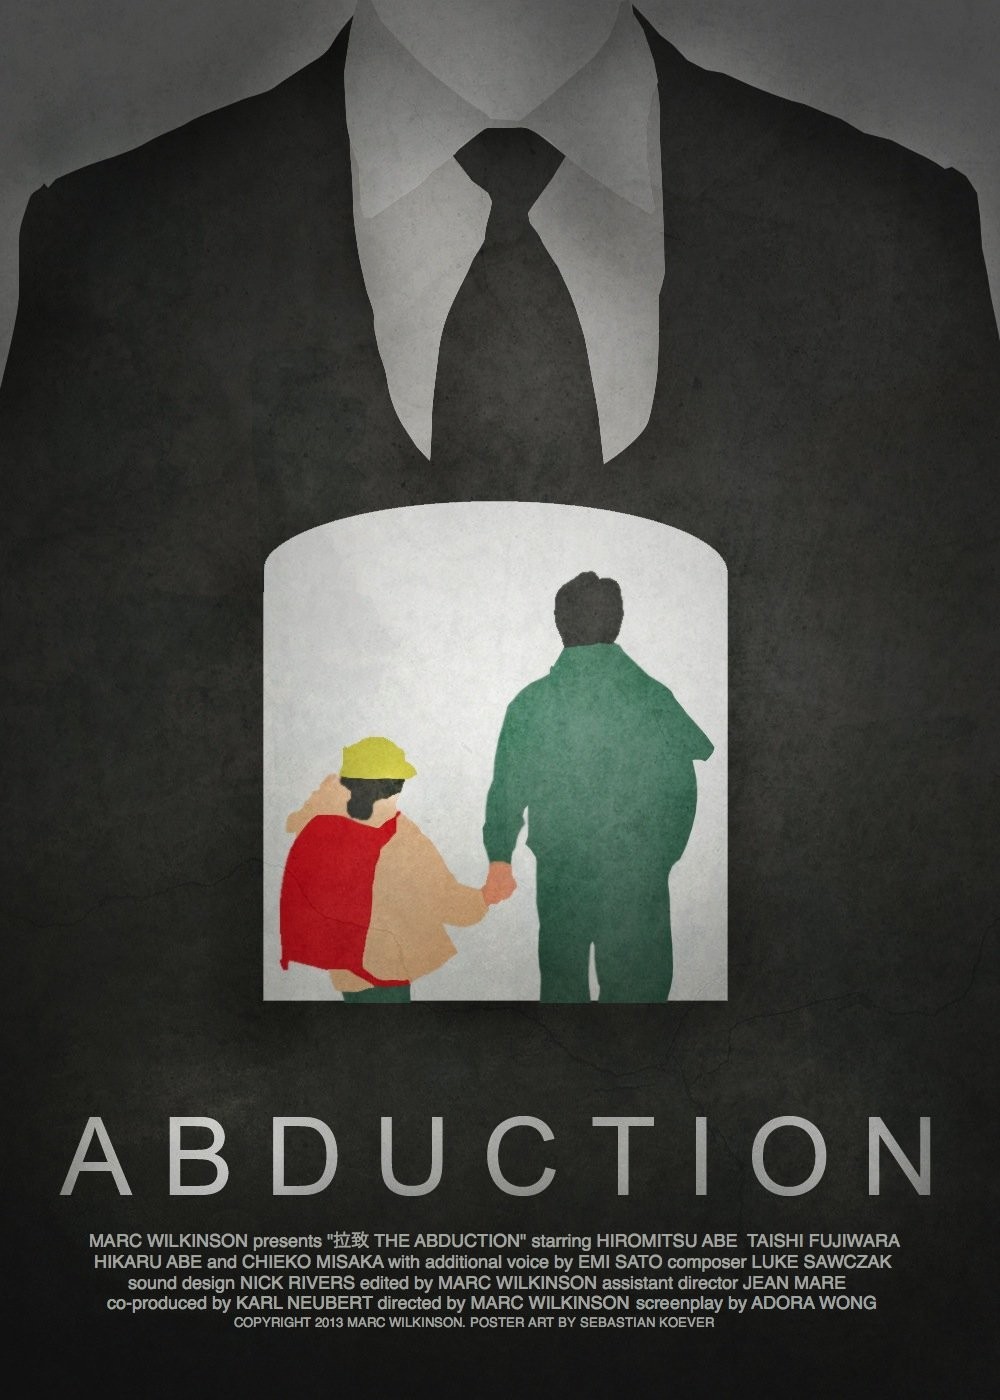 Extra Large Movie Poster Image for The Abduction